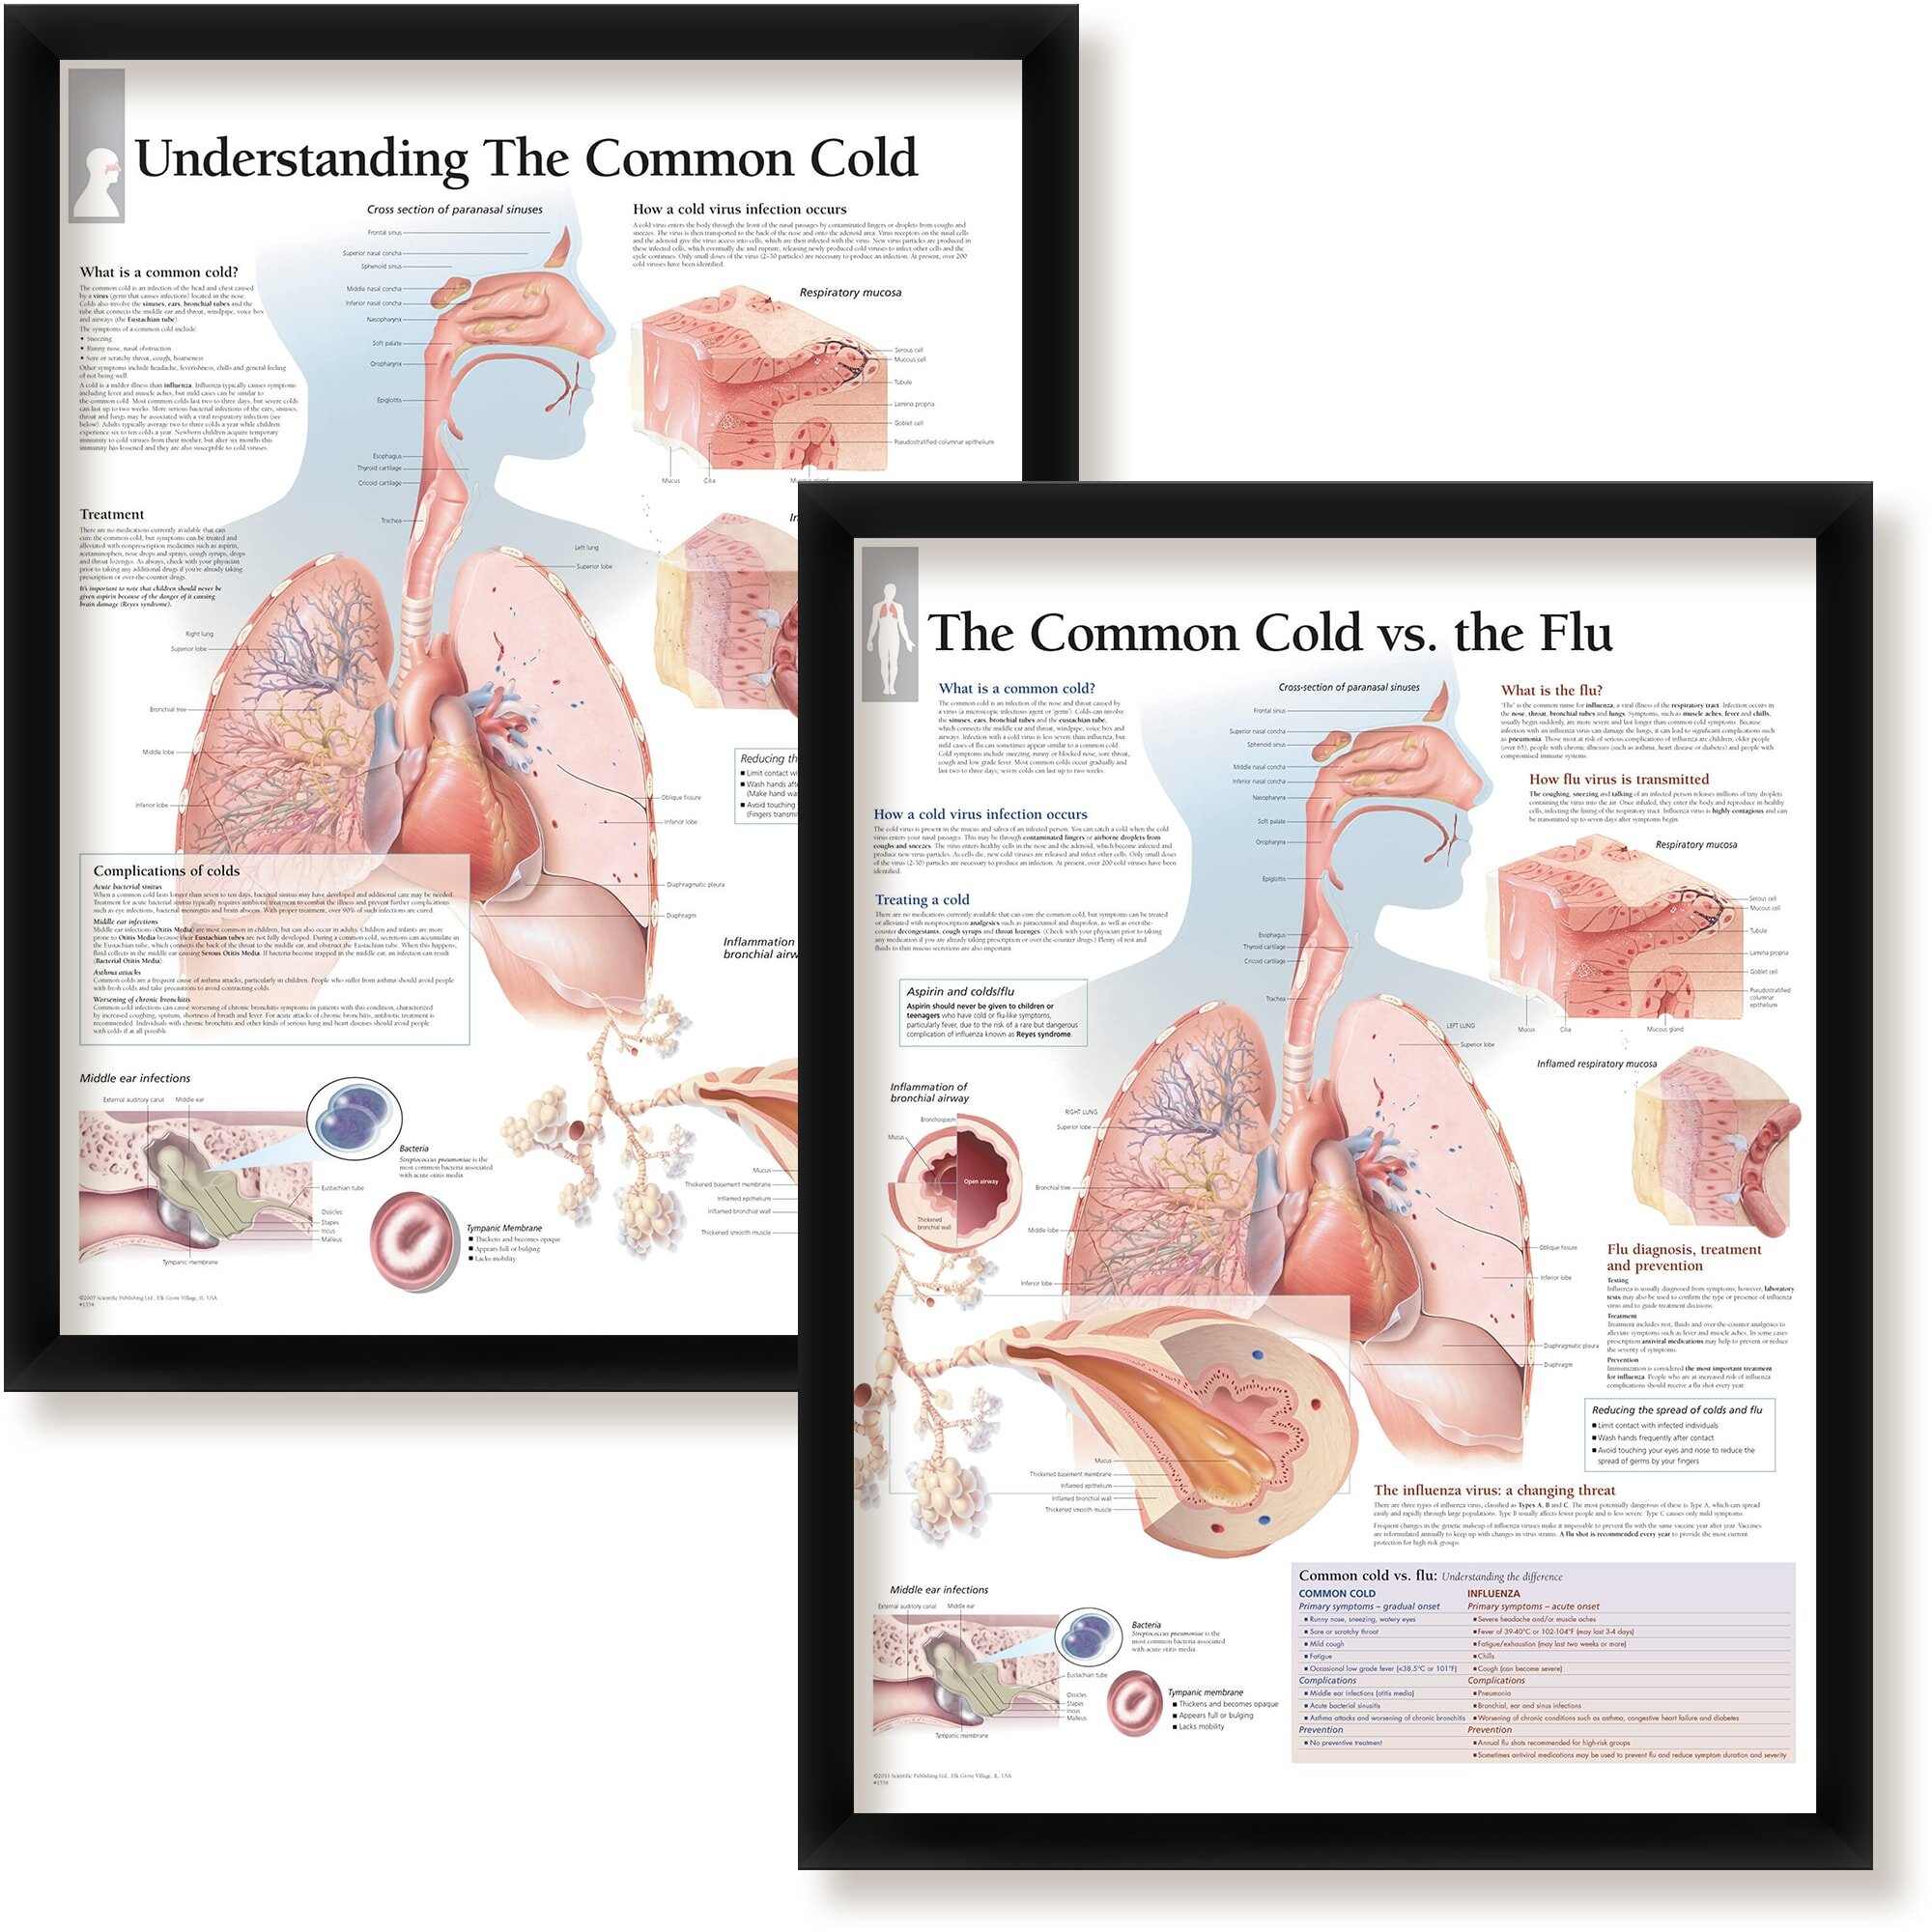 Facts about the common cold Poster for Sale by Murray-Mint